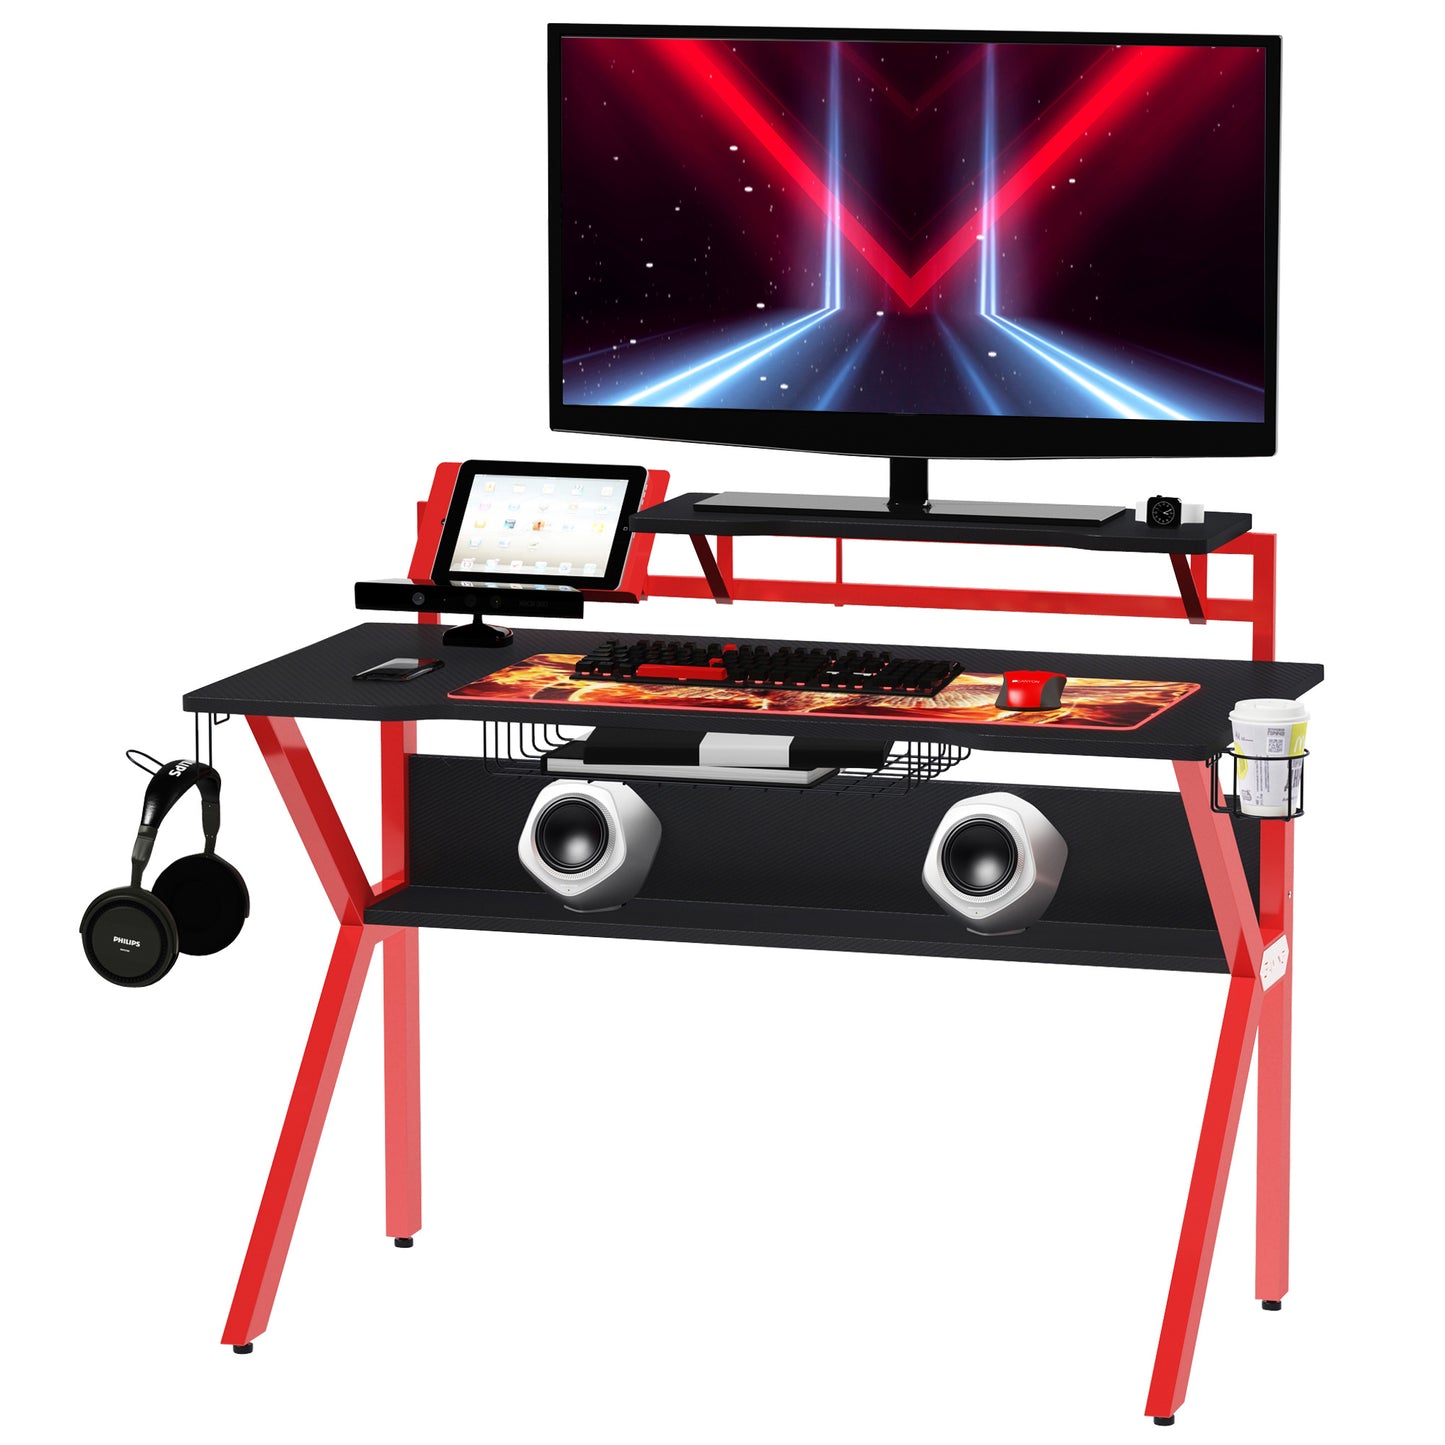 HOMCOM MDF Spacious Gaming Desk Workstations for Home and Office w/ Cup Holder Red